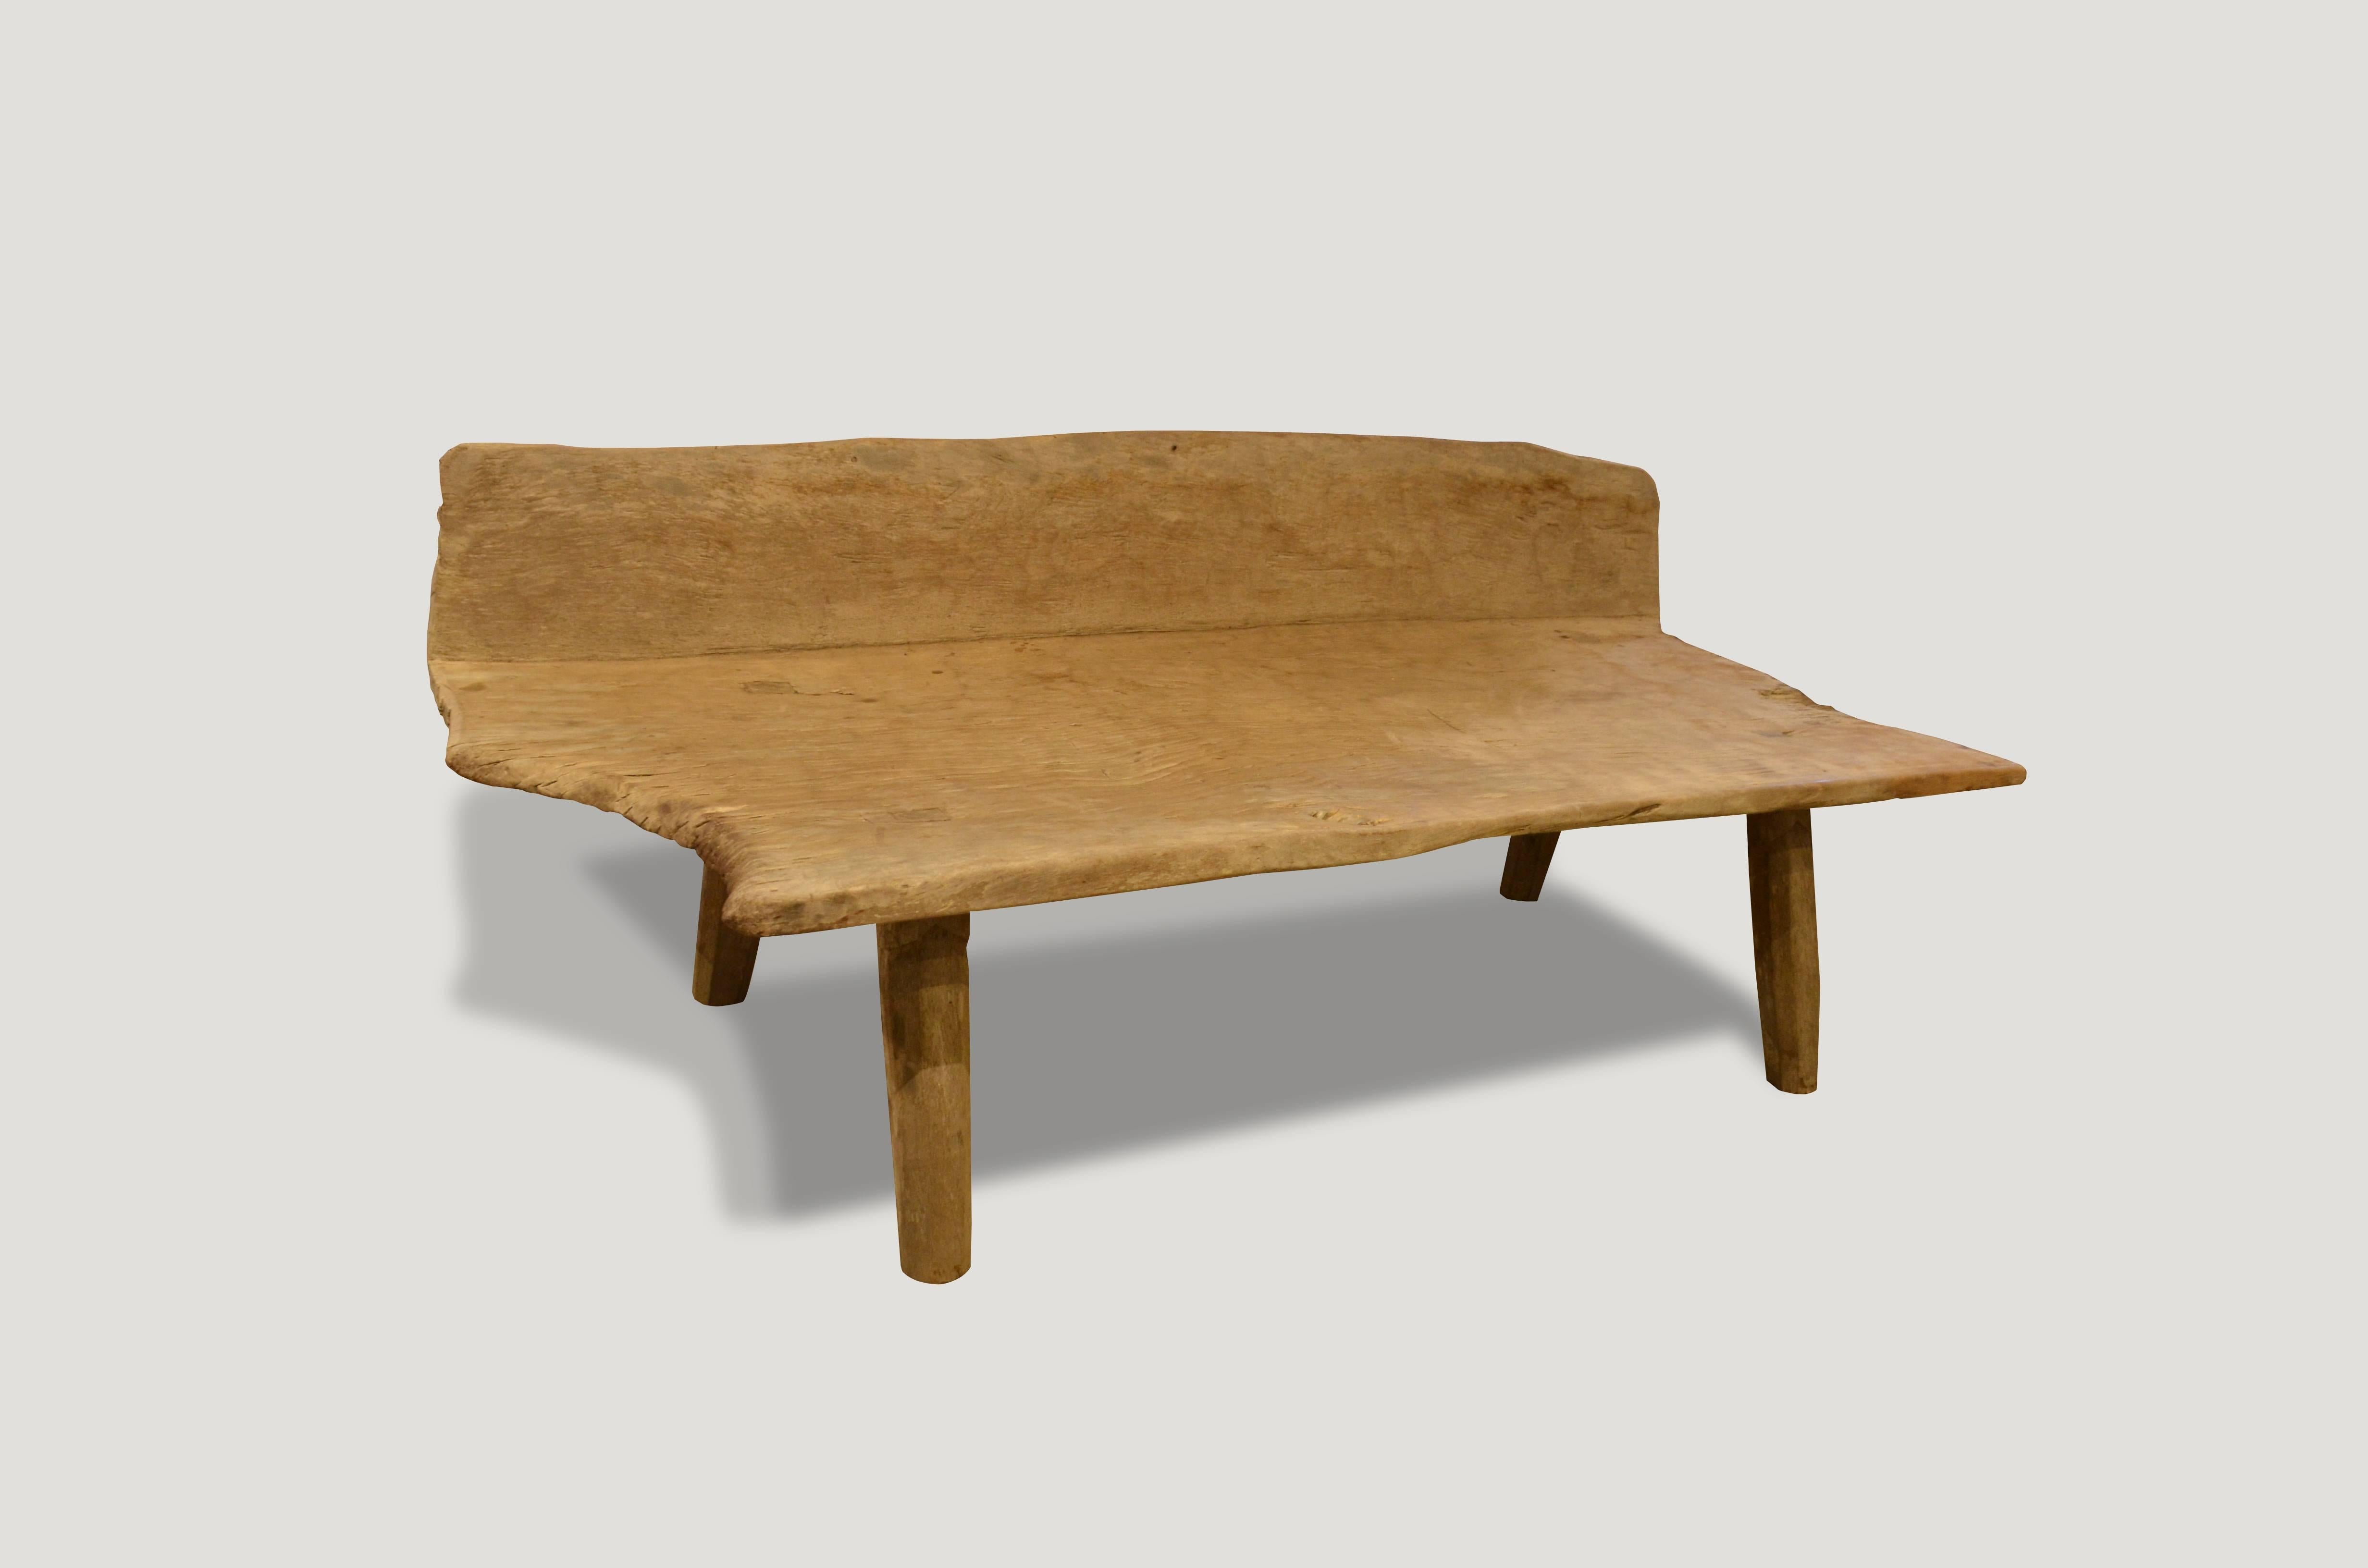 For the Primitive collector. This stunning bench has been hand-carved from a single teak wood root from the island Madura. Though it is Primitive there are beautiful, unexpected, hand-carved bevelled legs. Rare.

This bench was sourced in the spirit